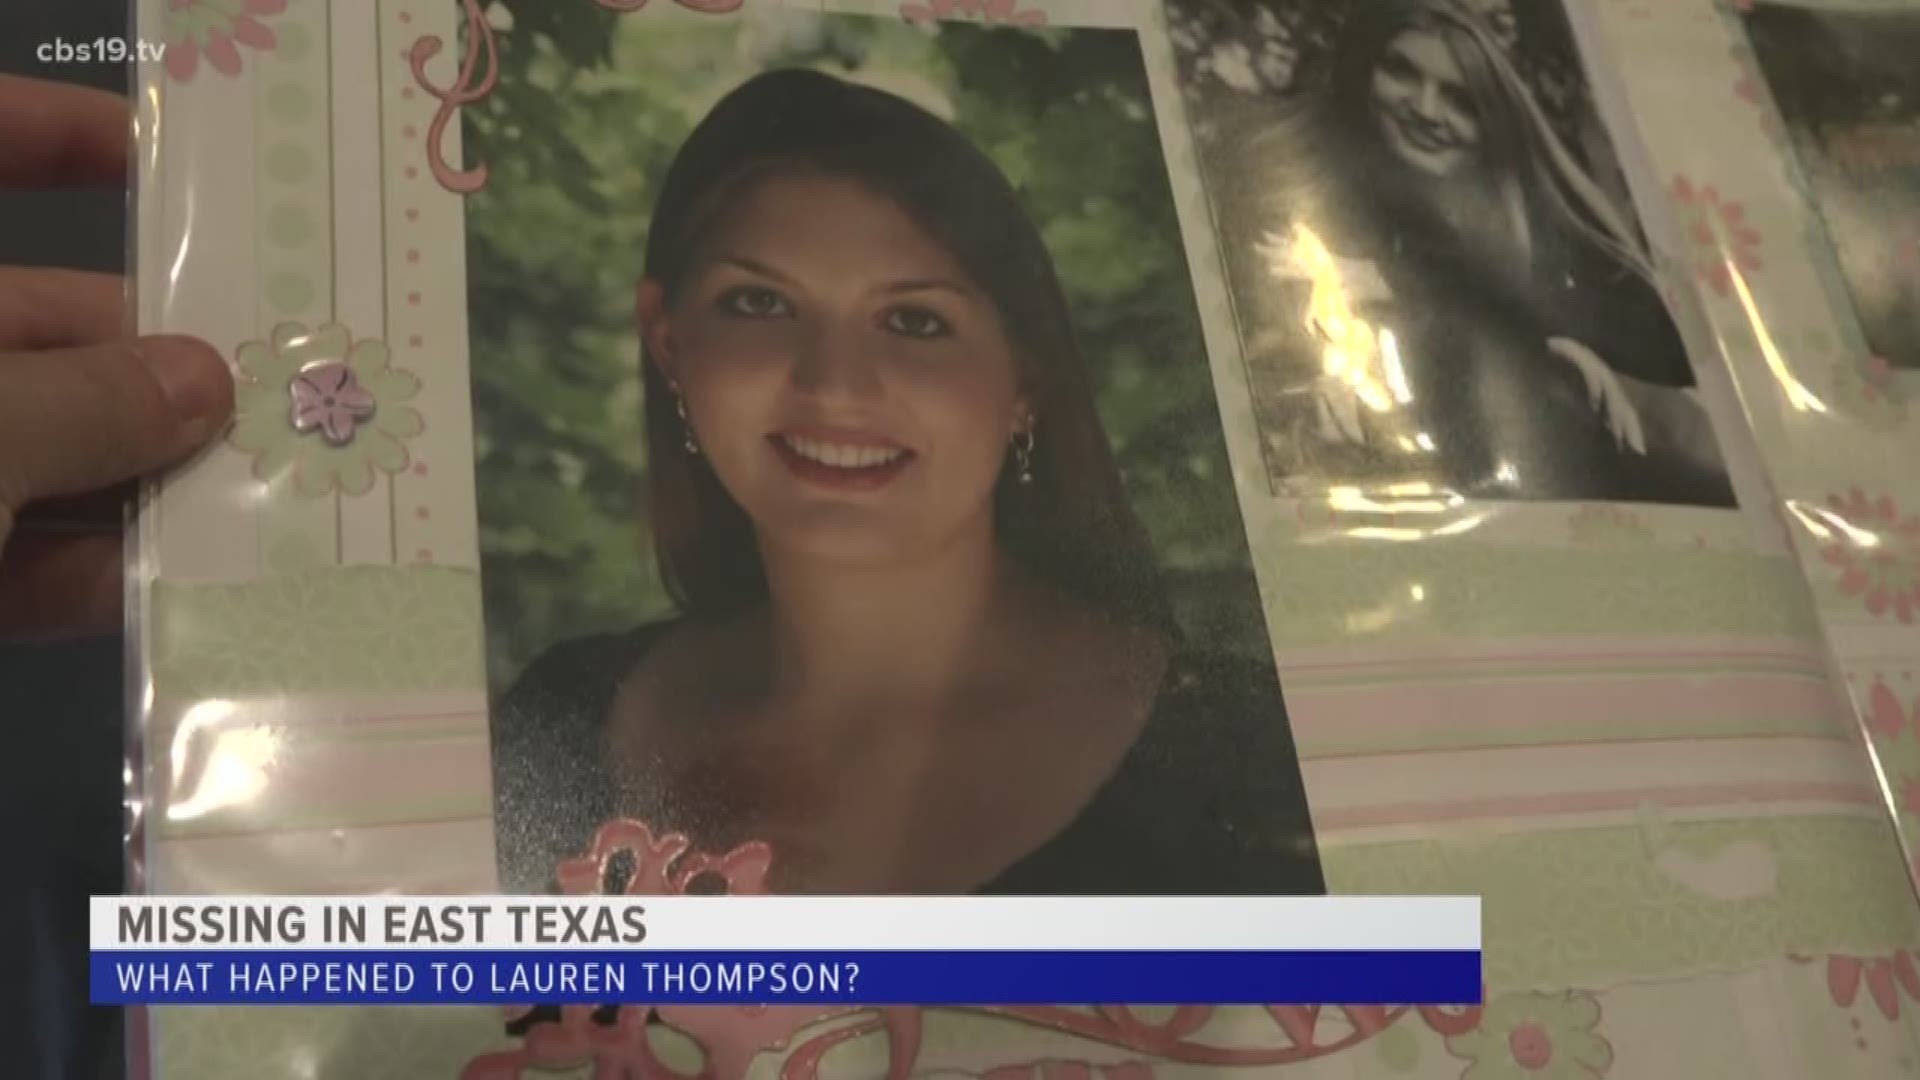 What happened to Lauren Thompson? Her mother speaks out